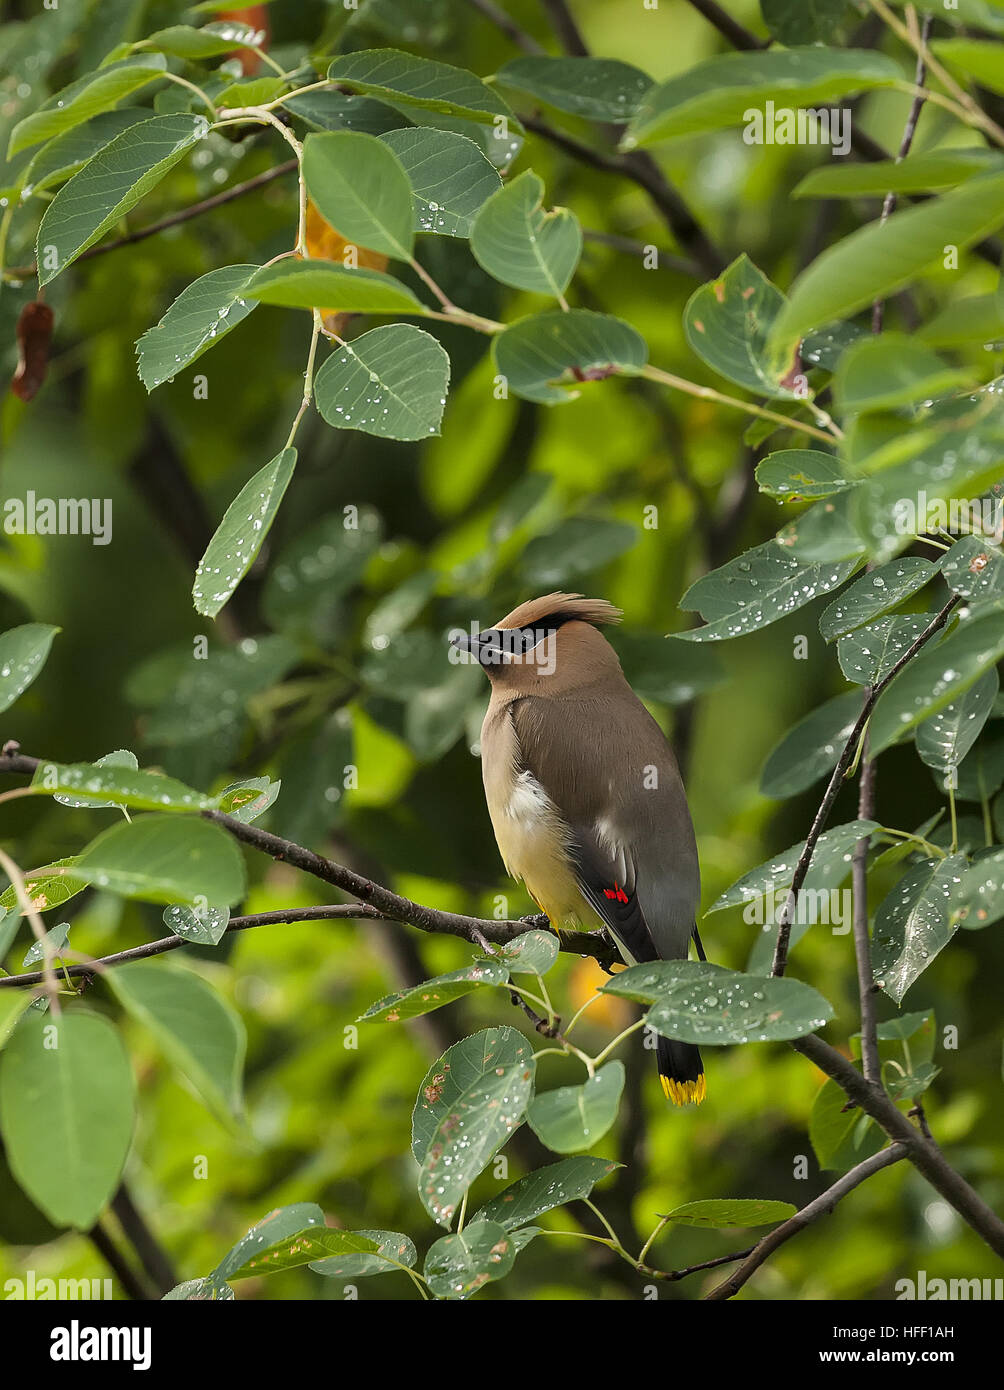 A lone Cedar Waxwing, Bombycilla cedrorum, perched in a tree with wet leaves. Stock Photo